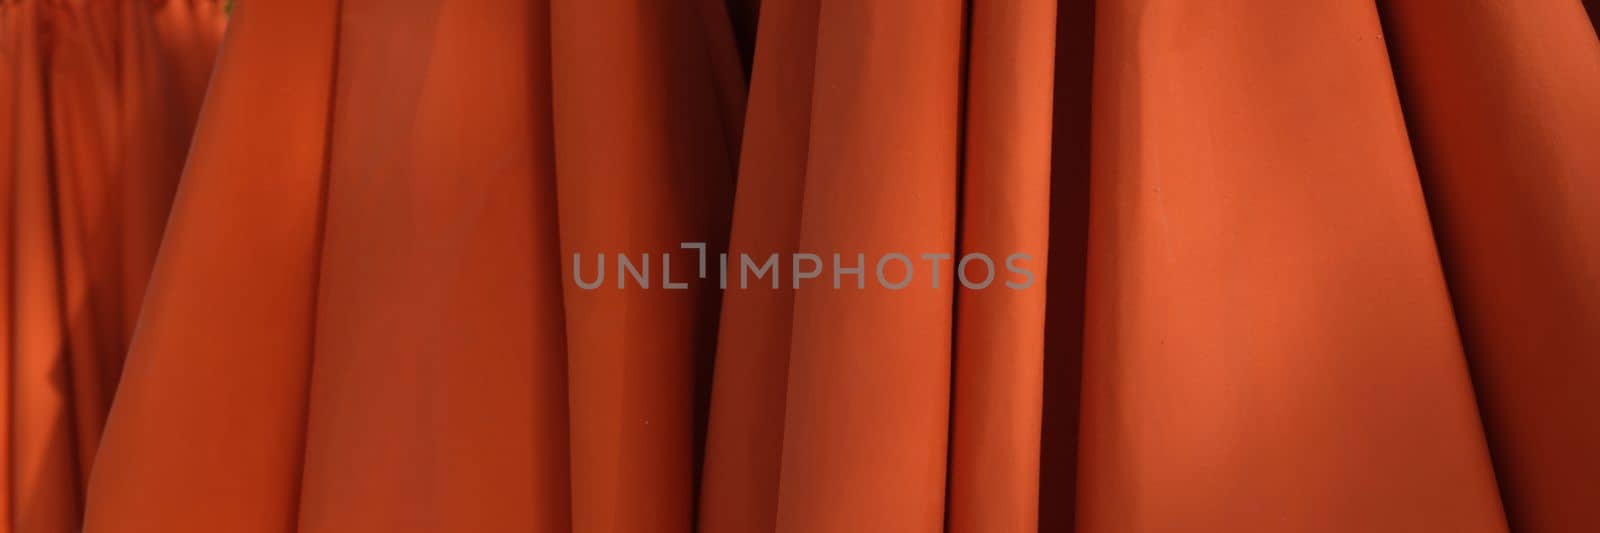 Red orange umbrellas stand stacked on beach. Sun protection equipment for beach